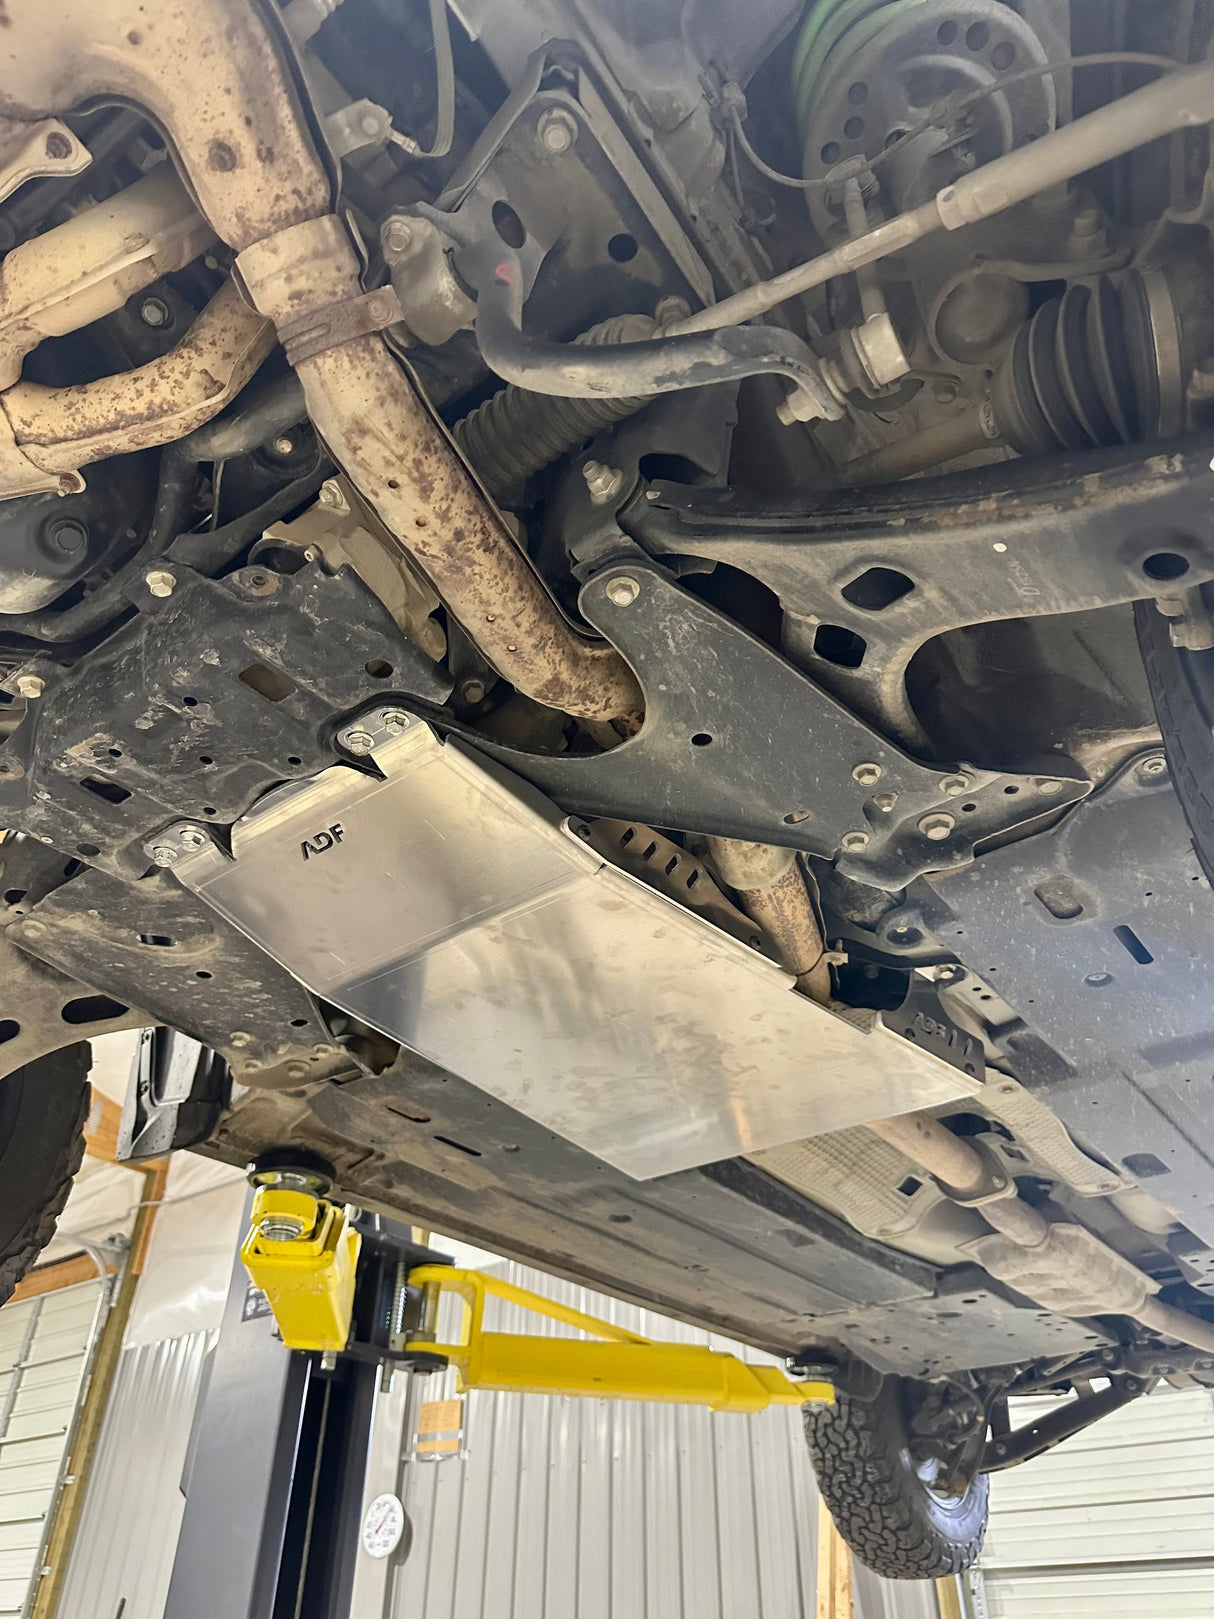 Enhance the sturdiness and guard your Subaru against off-road hazards with the ADF Skid Plate. Ensuring defense for your vehicle reduces the likelihood of harm from foreseeable and unforeseen circumstances.